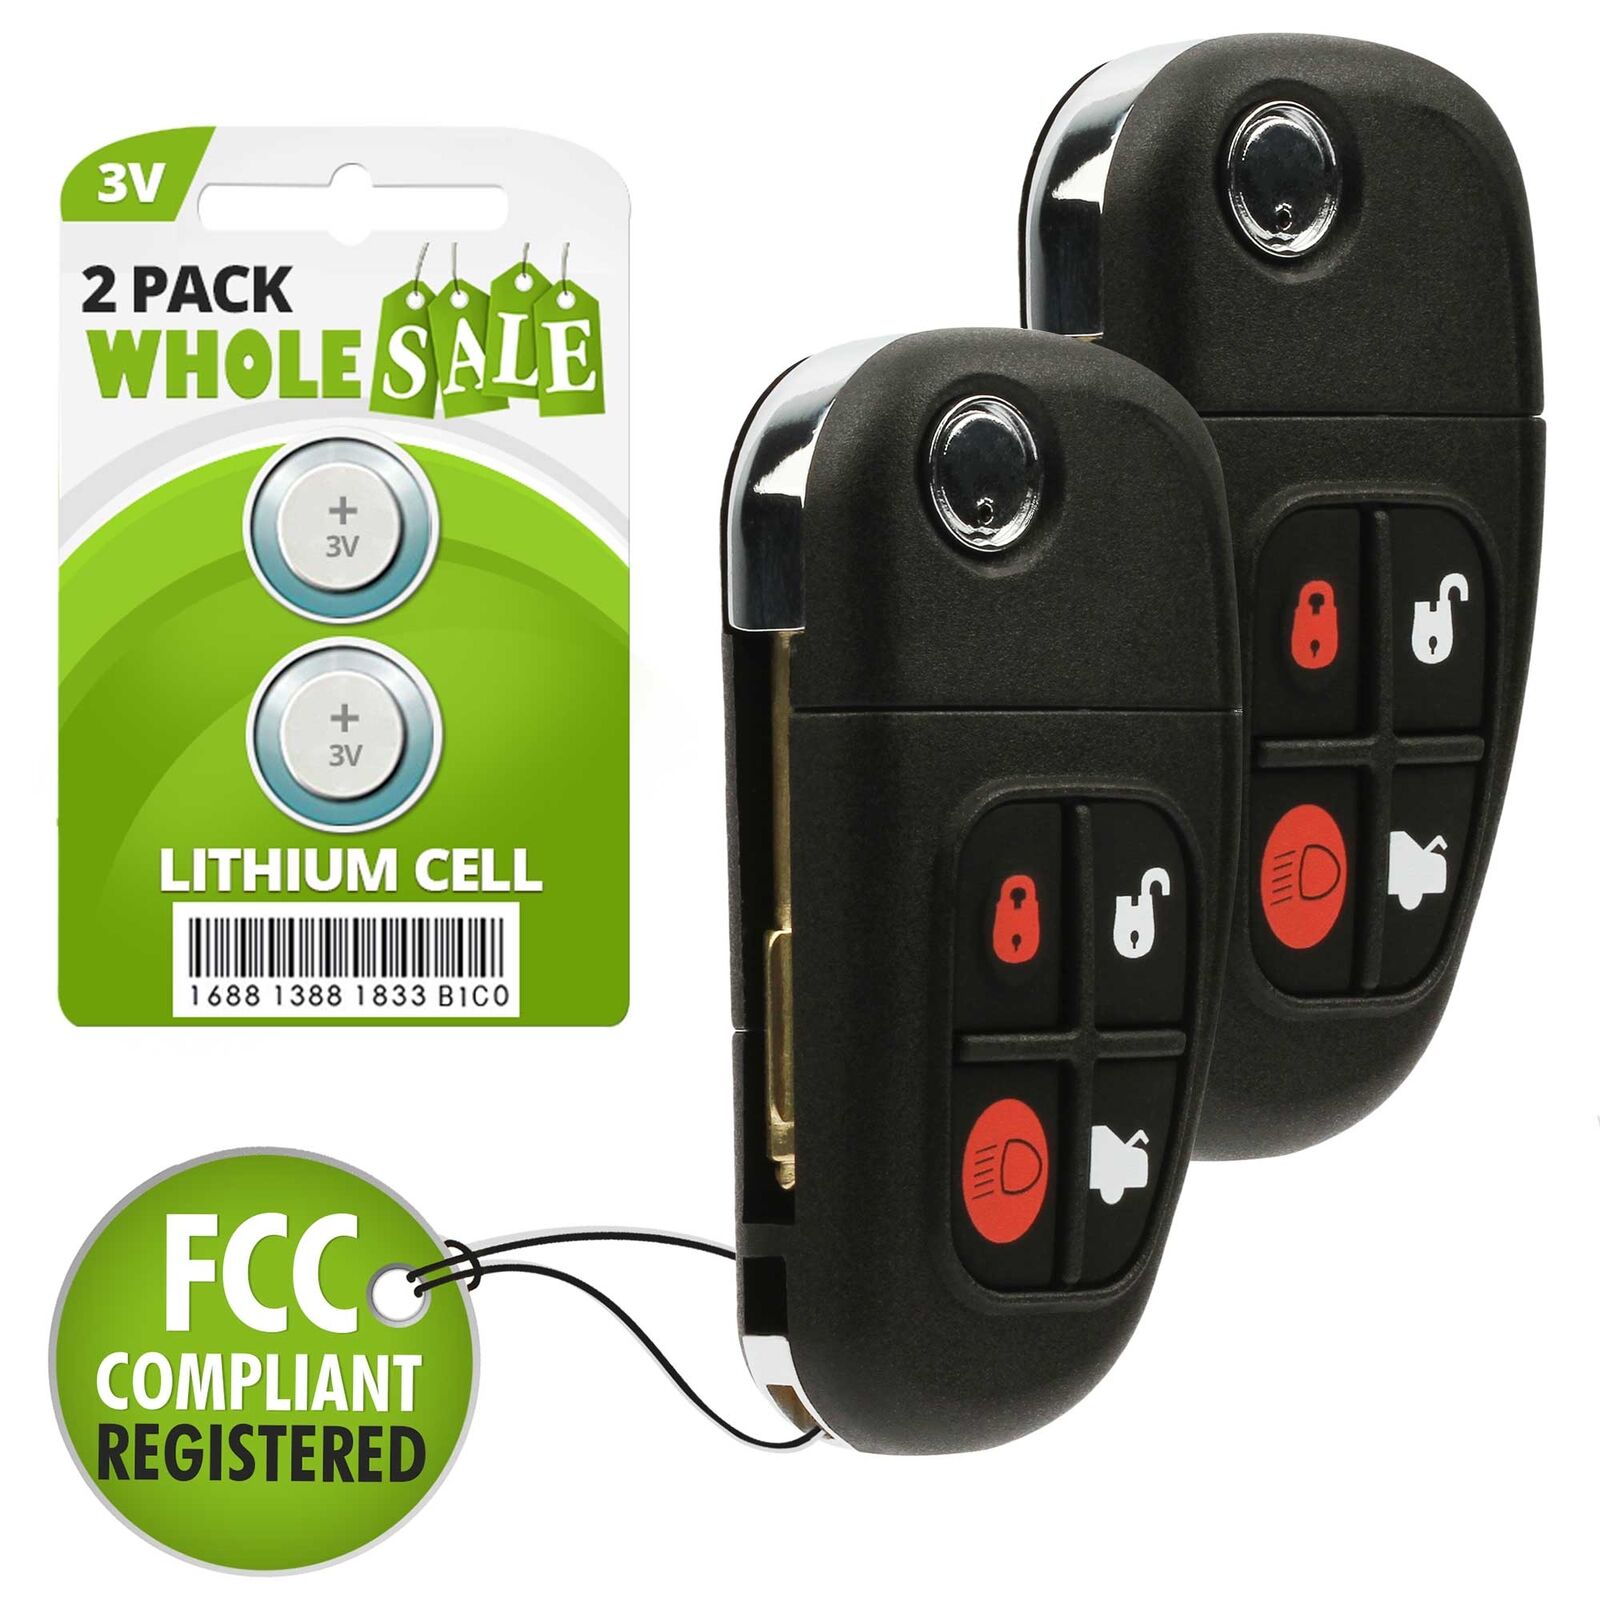 2 Replacement For 2001 2002 2003 2004 2005 2006 2007 2008 Jaguar S-Type  Key Fob